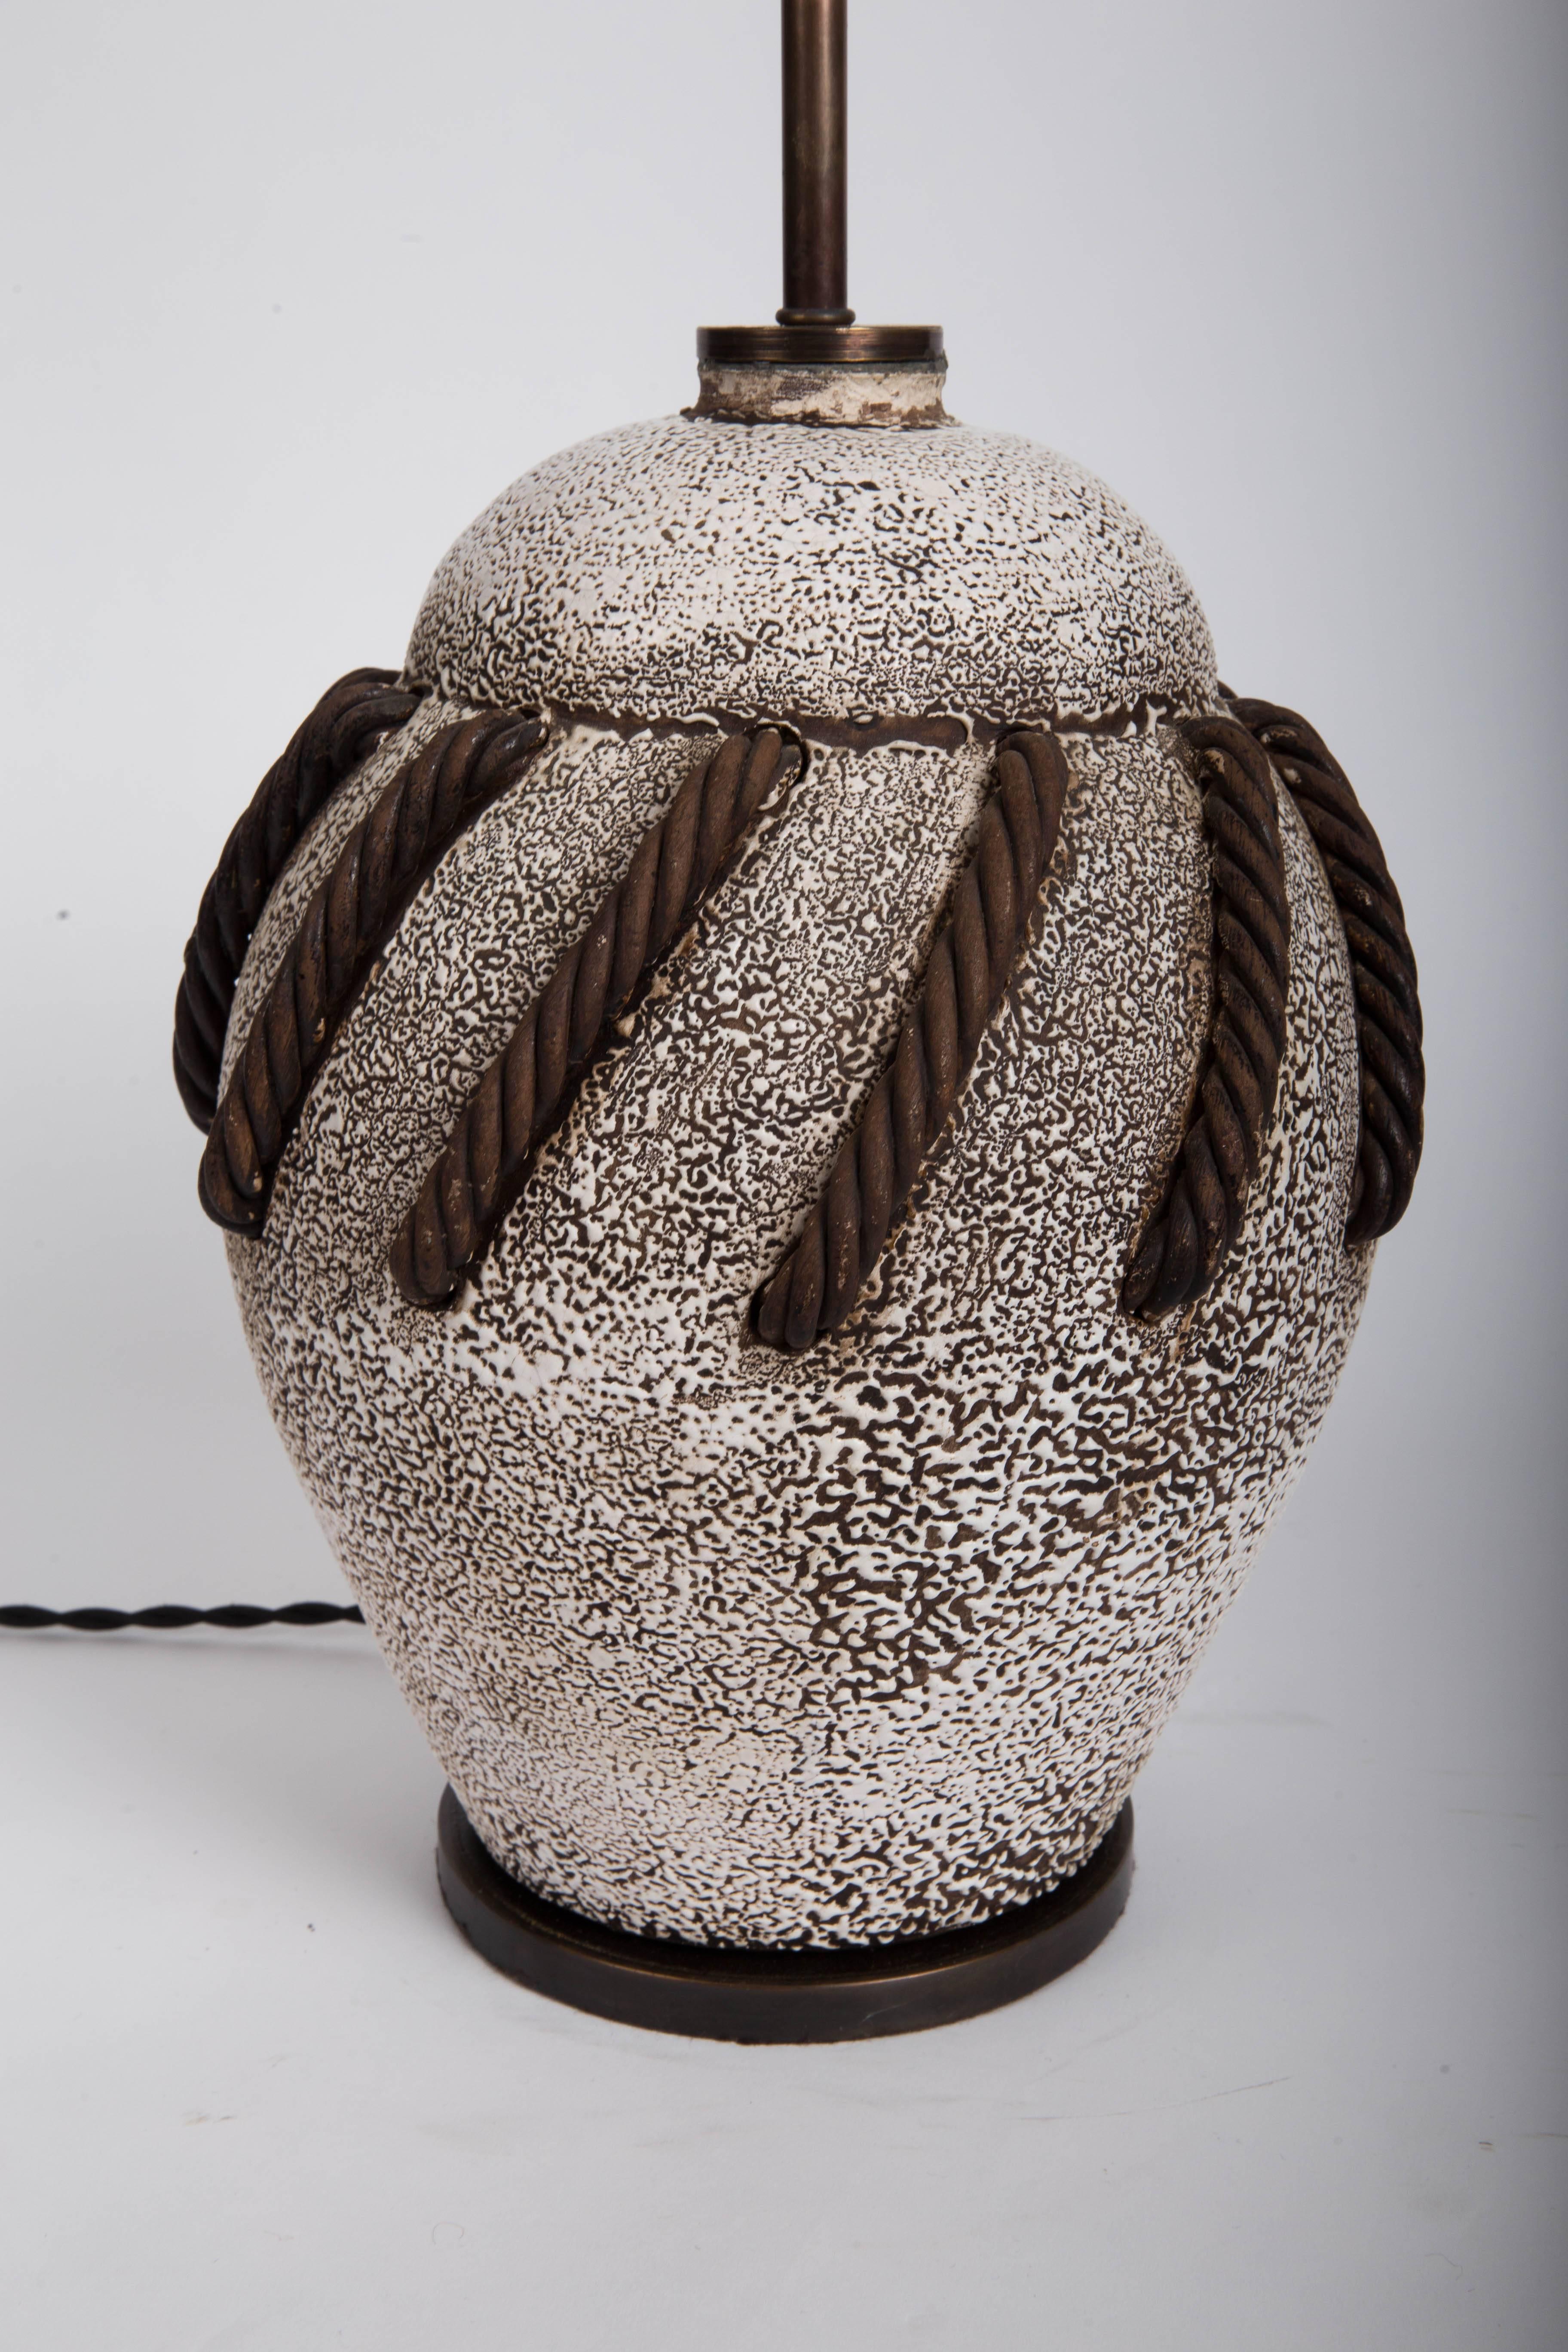 Textured Brown + White Ceramic Lamp with Rope Detailing 6